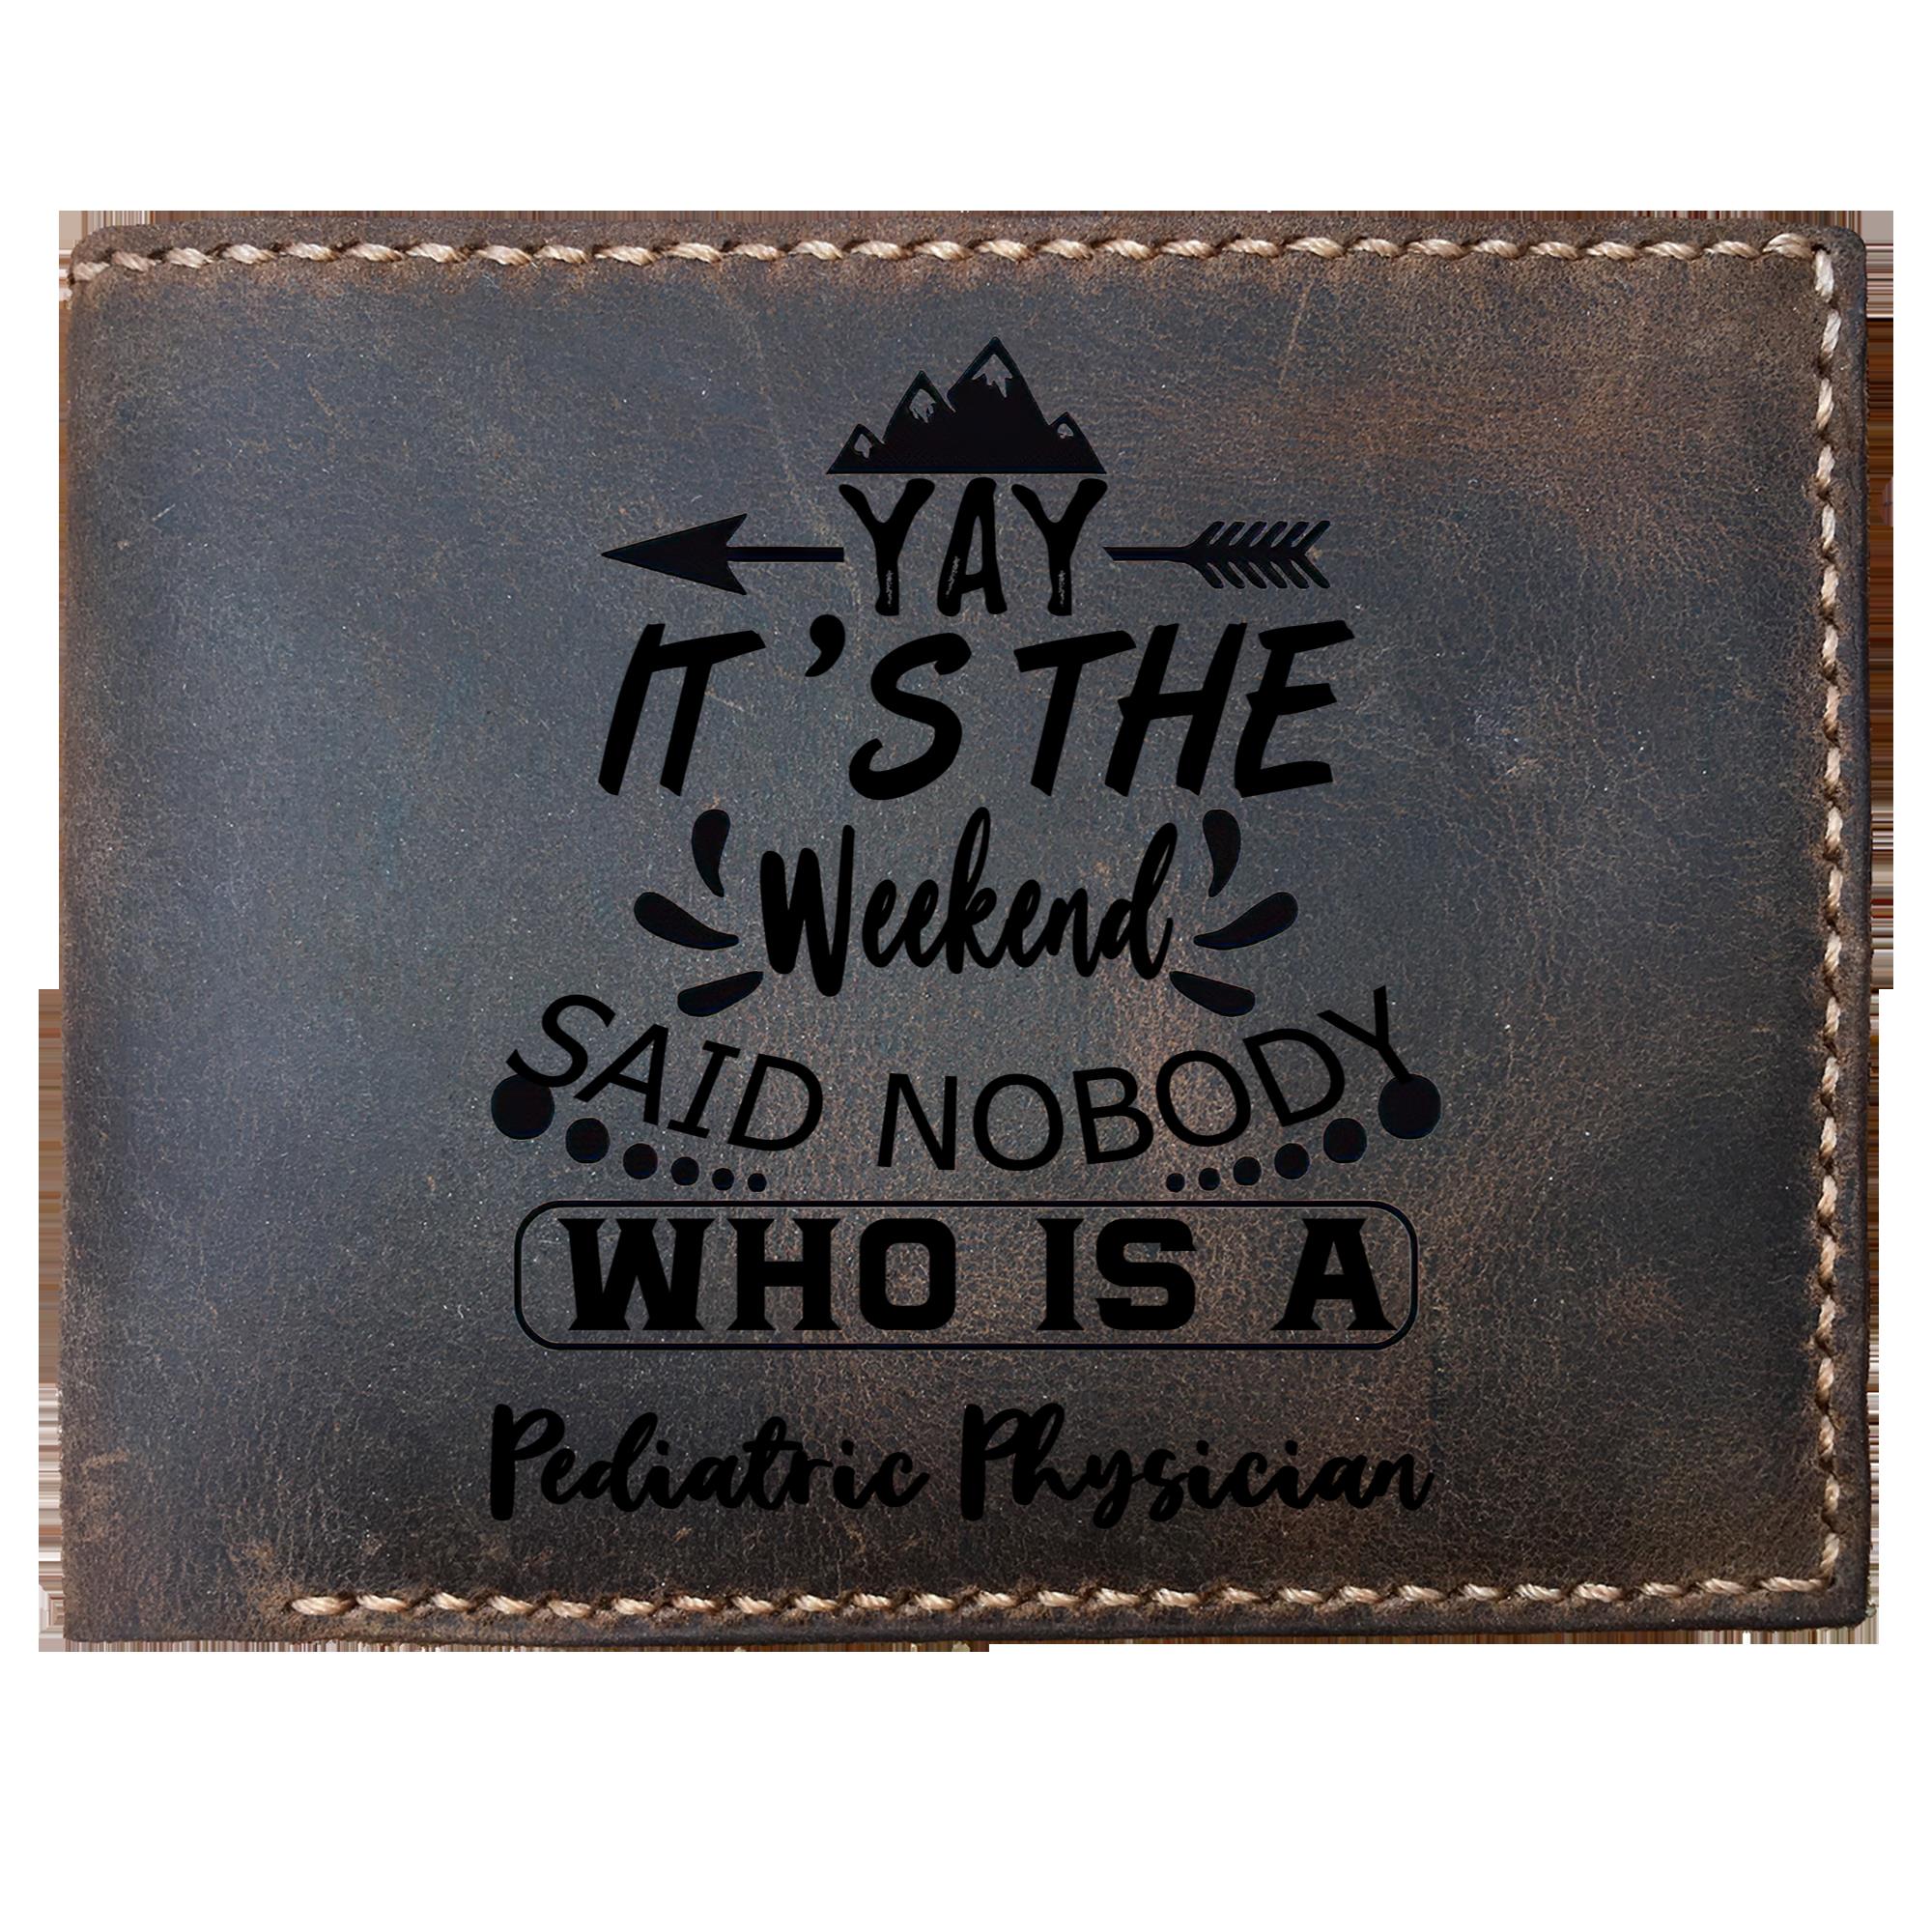 Skitongifts Funny Custom Laser Engraved Bifold Leather Wallet For Men, It's The Weekend Said Nobody Who Is A Pediatric Physician, Father's Day Gifts